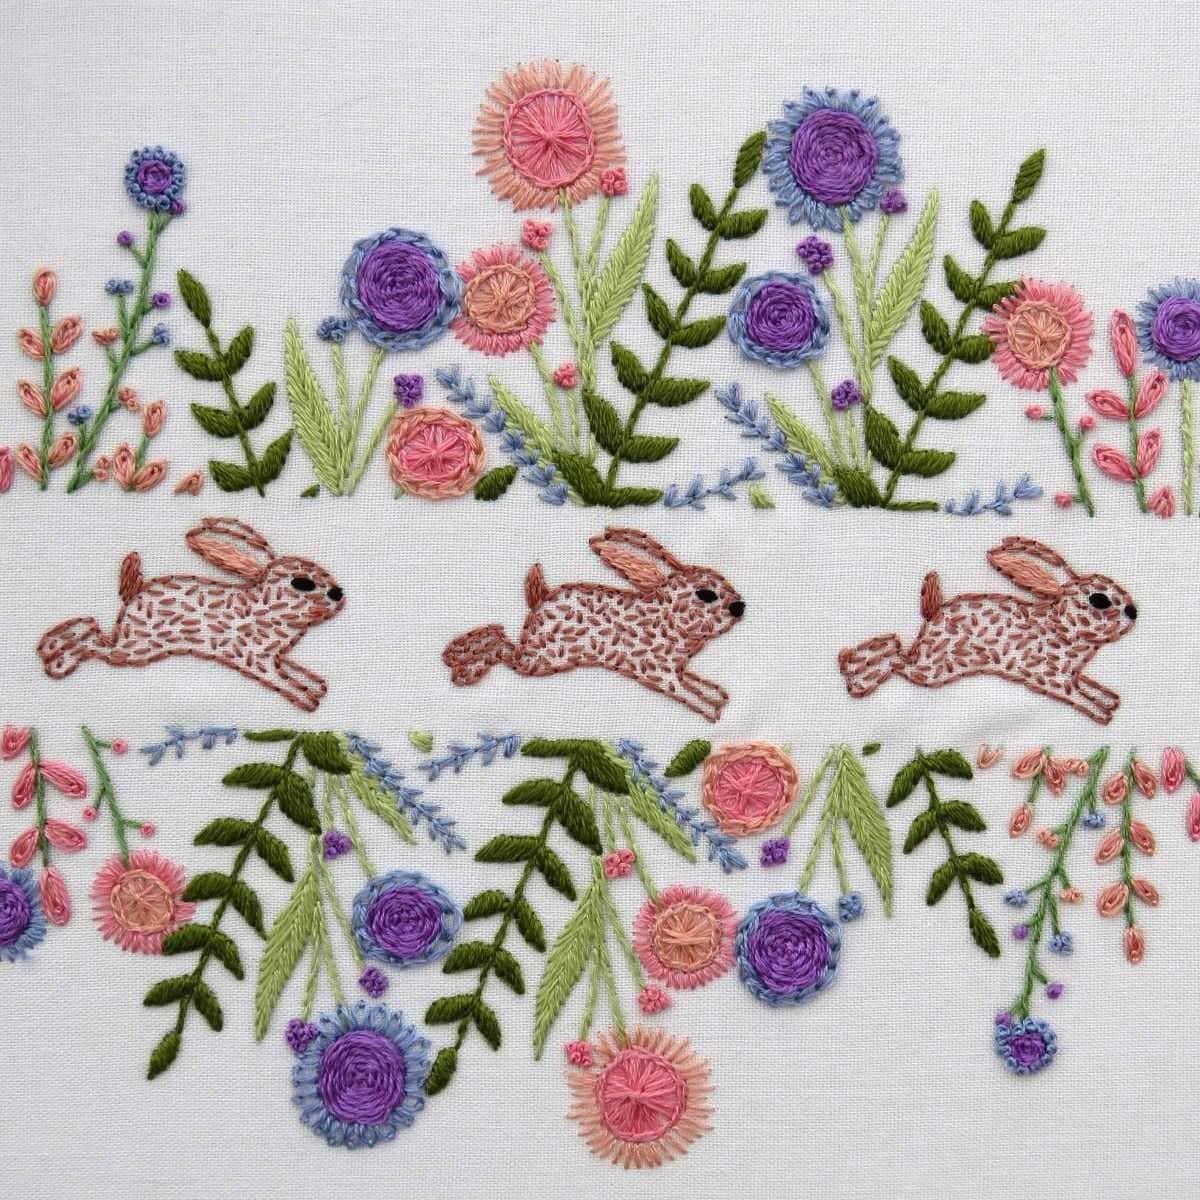 Spring Rabbits Pre Printed Hand Embroidery Fabric Panel , Pre Printed Fabric Pattern , StitchDoodles , embroidery hoop kit, embroidery kit for adults, embroidery kit for beginers, flowers, hand embroidery, hand embroidery pattern, pre printed fabric, rabbits , StitchDoodles , shop.stitchdoodles.com